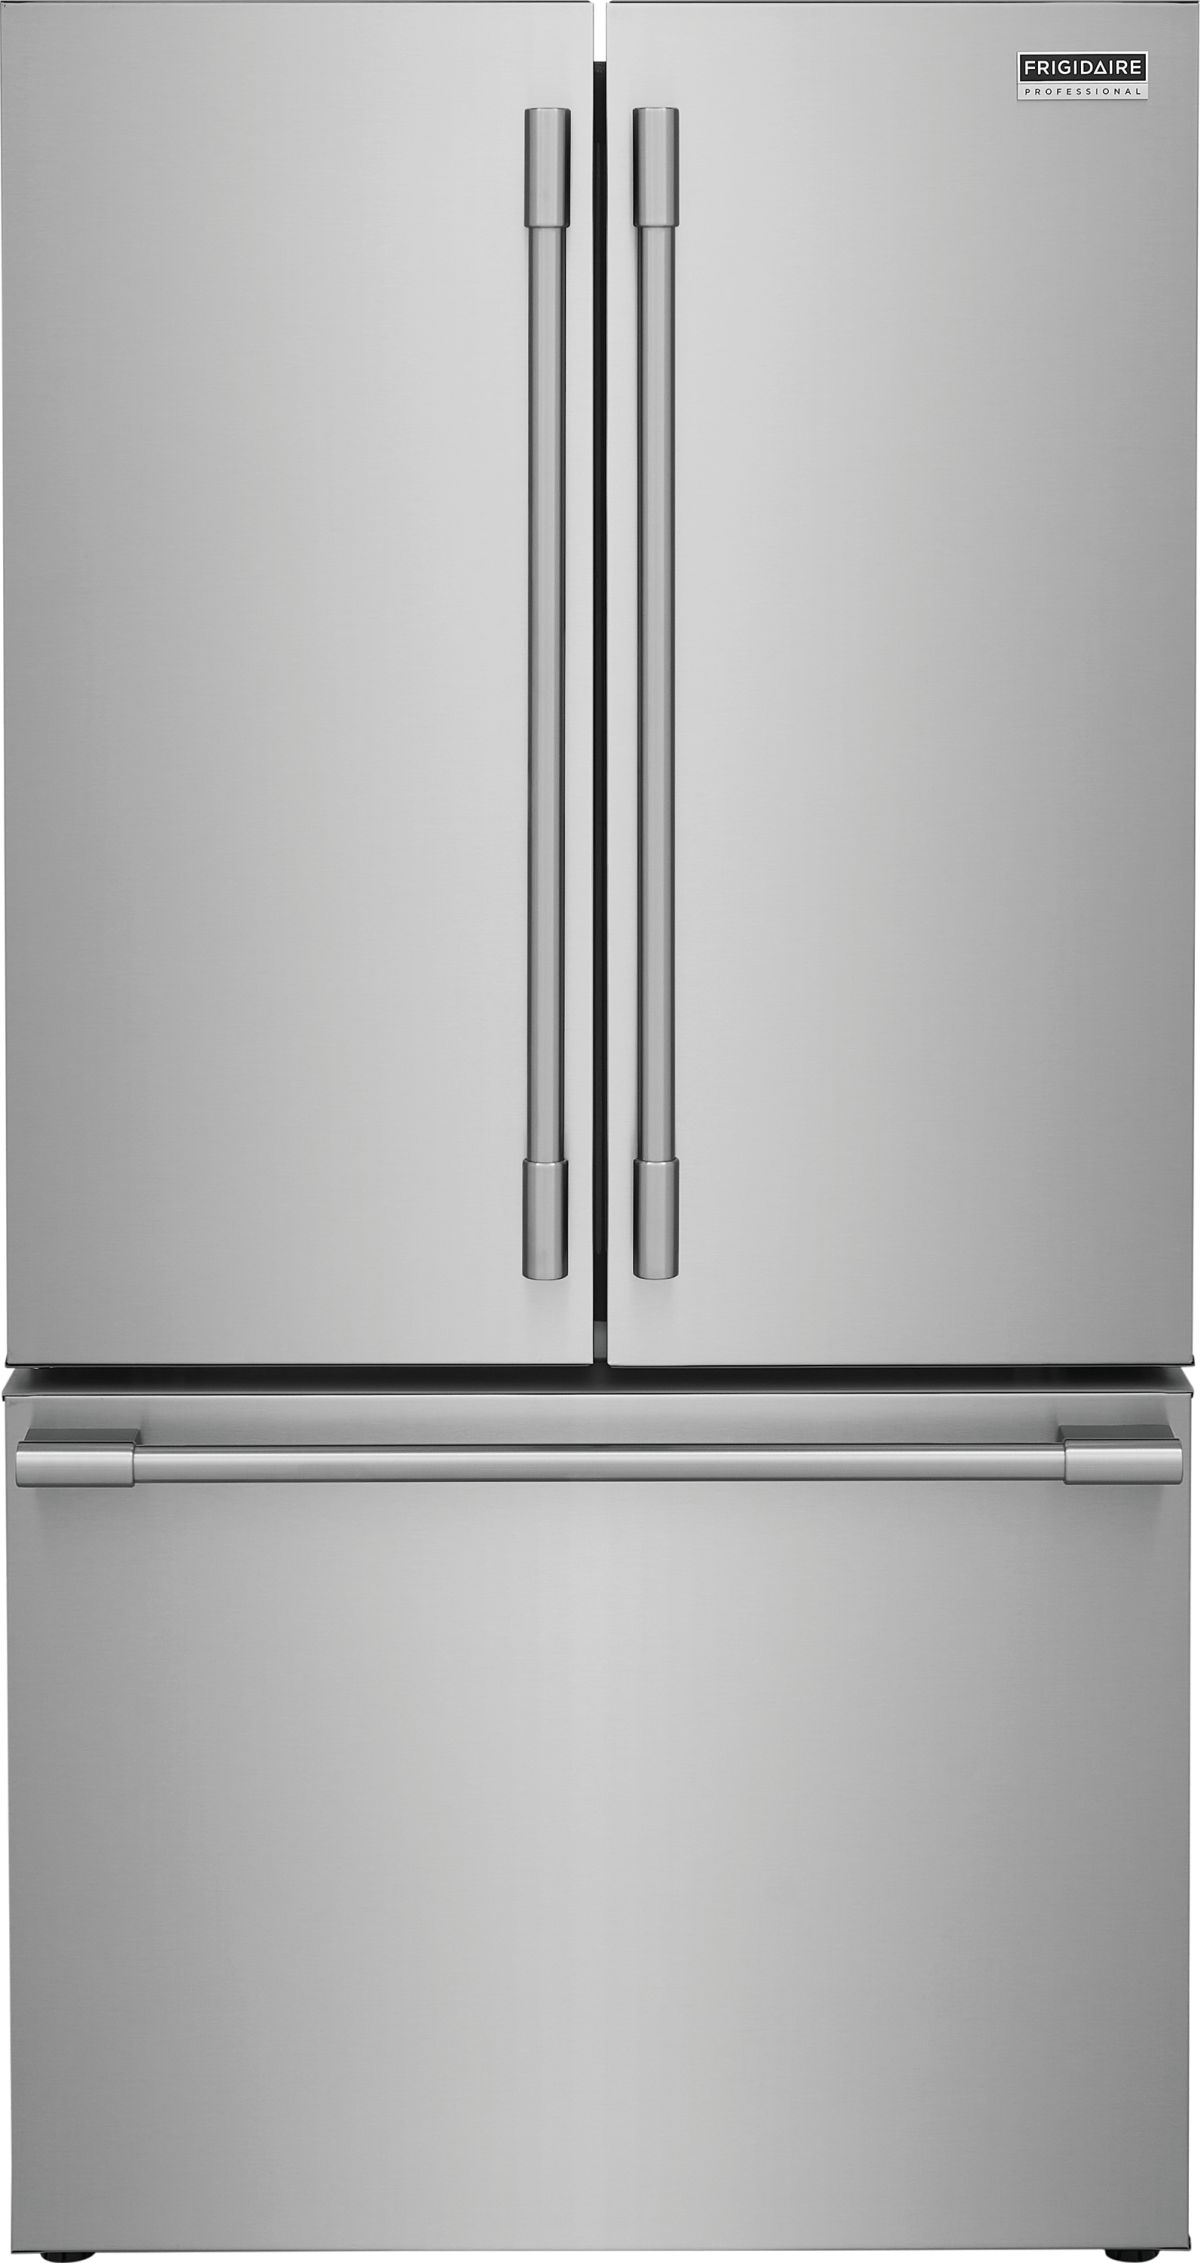 Frigidaire Professional 23 3 Cu Ft Smudge Proof Stainless Steel Counter Depth French Door